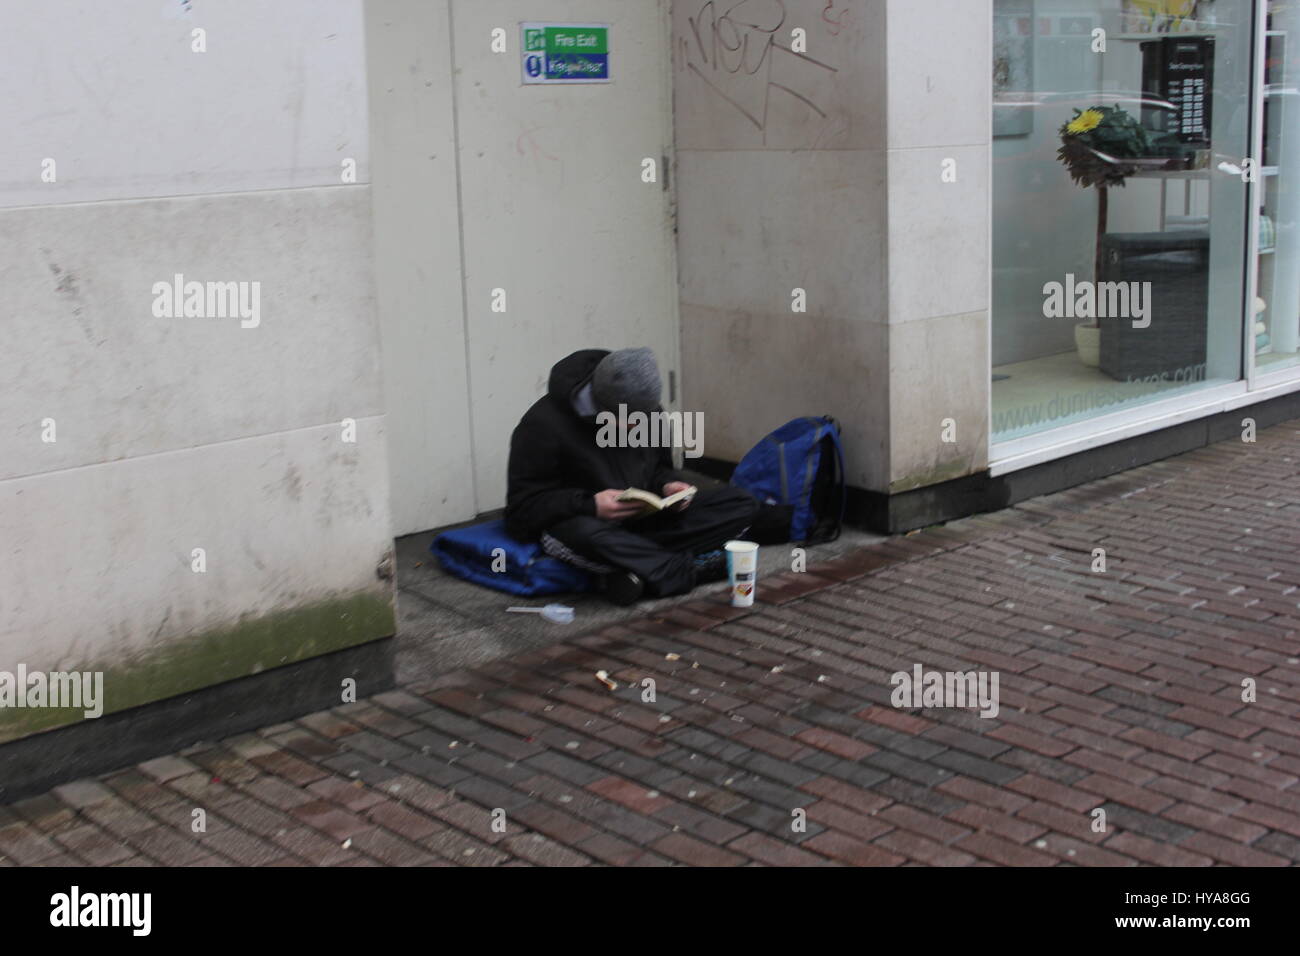 Images taken Saturday 1st April 2017 of homeless people in Belfast city centre. their were a lot more around but i chose 3 to start with.Saturday was very mild weather wise for a change with the start of spring.I am back at college studying and this is a topic    i have started in relation to coursework I believe this is a subject that needs more attention,More funding and less judgement. My dad always said the only time you should look down at someone is when you are helping them up. Stock Photo